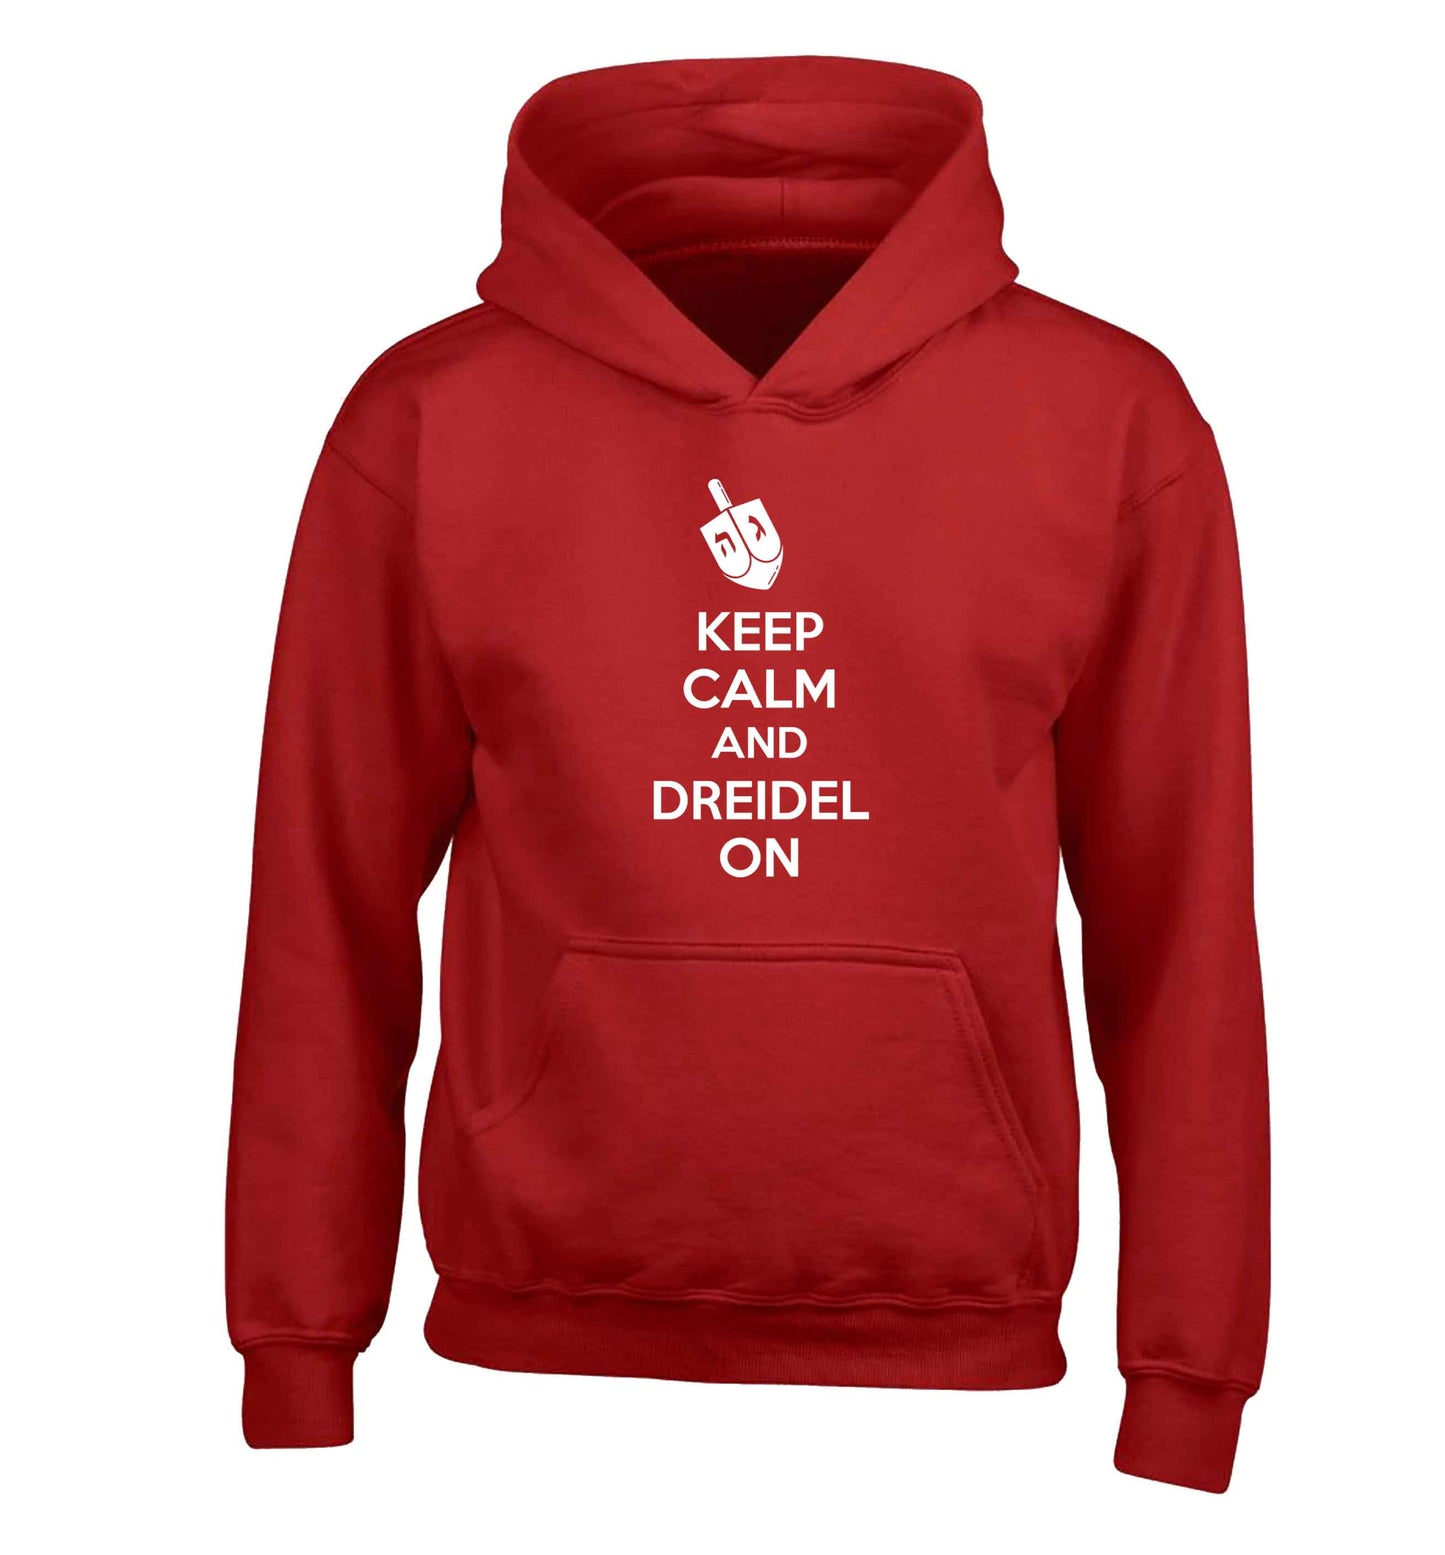 Keep calm and dreidel on children's red hoodie 12-13 Years